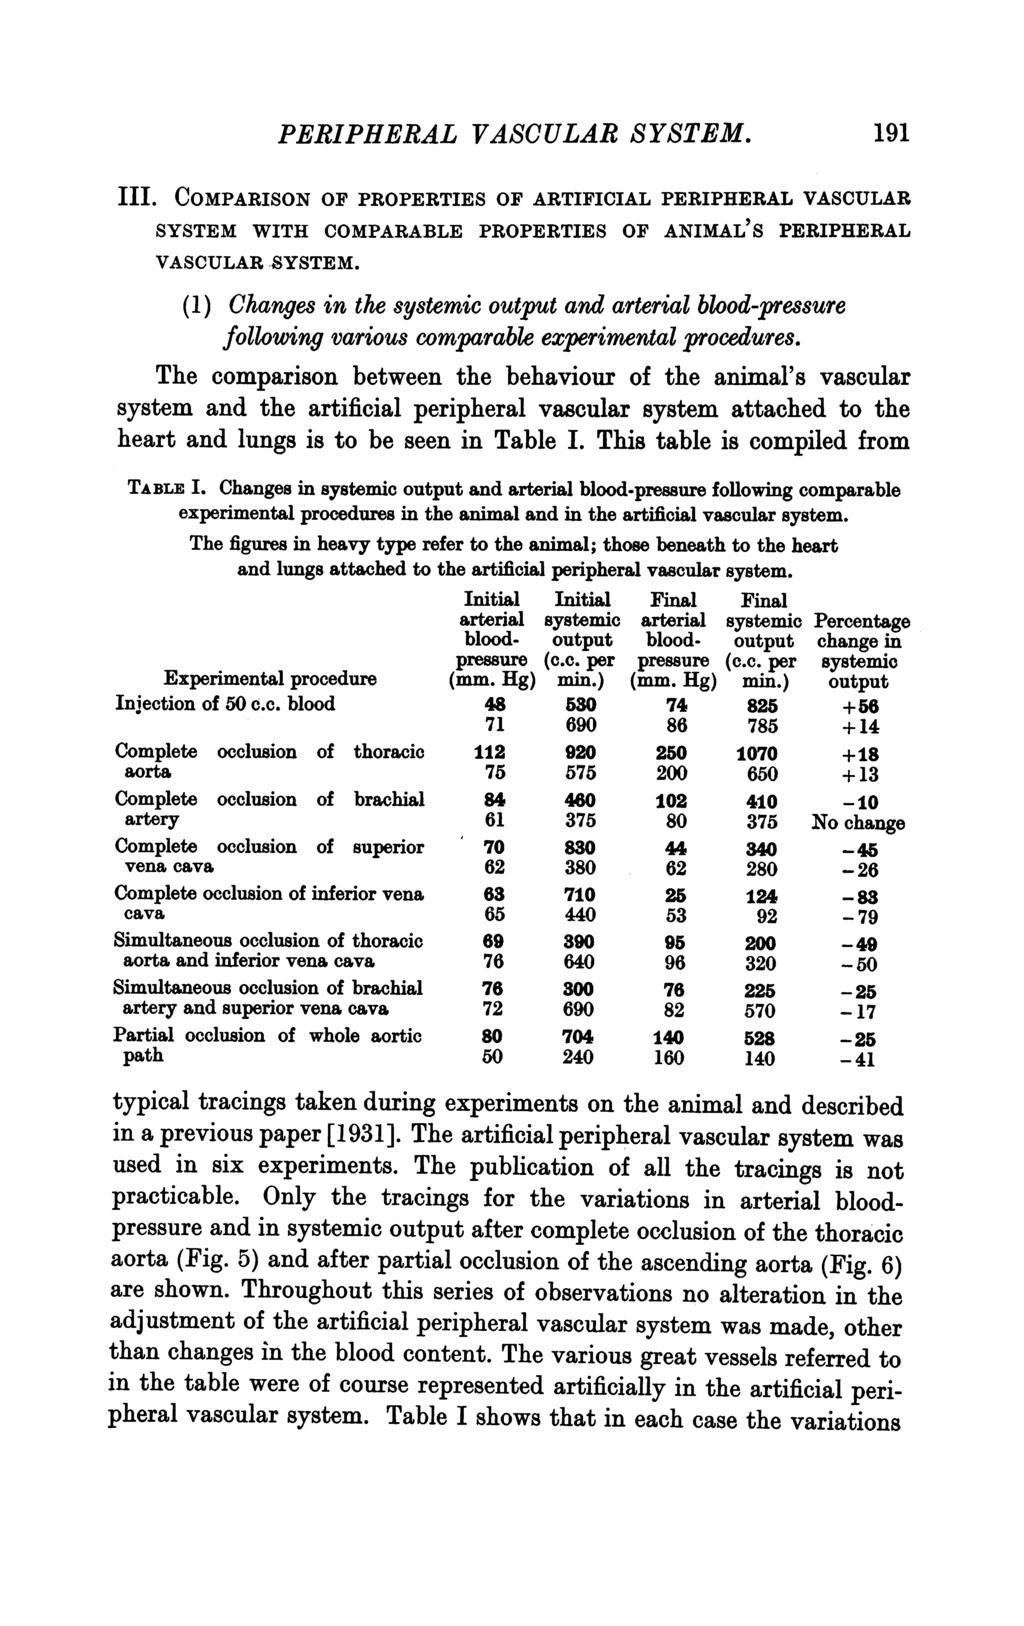 PERIPHERAL VASCULAR SYSTEM. 191 III. COMPARISON OF PROPERTIES OF ARTIFICIAL PERIPHERAL VASCULAR SYSTEM WITH COMPARABLE PROPERTIES OF ANIMAL S PERIPHERAL VASCULAR SYSTEM.